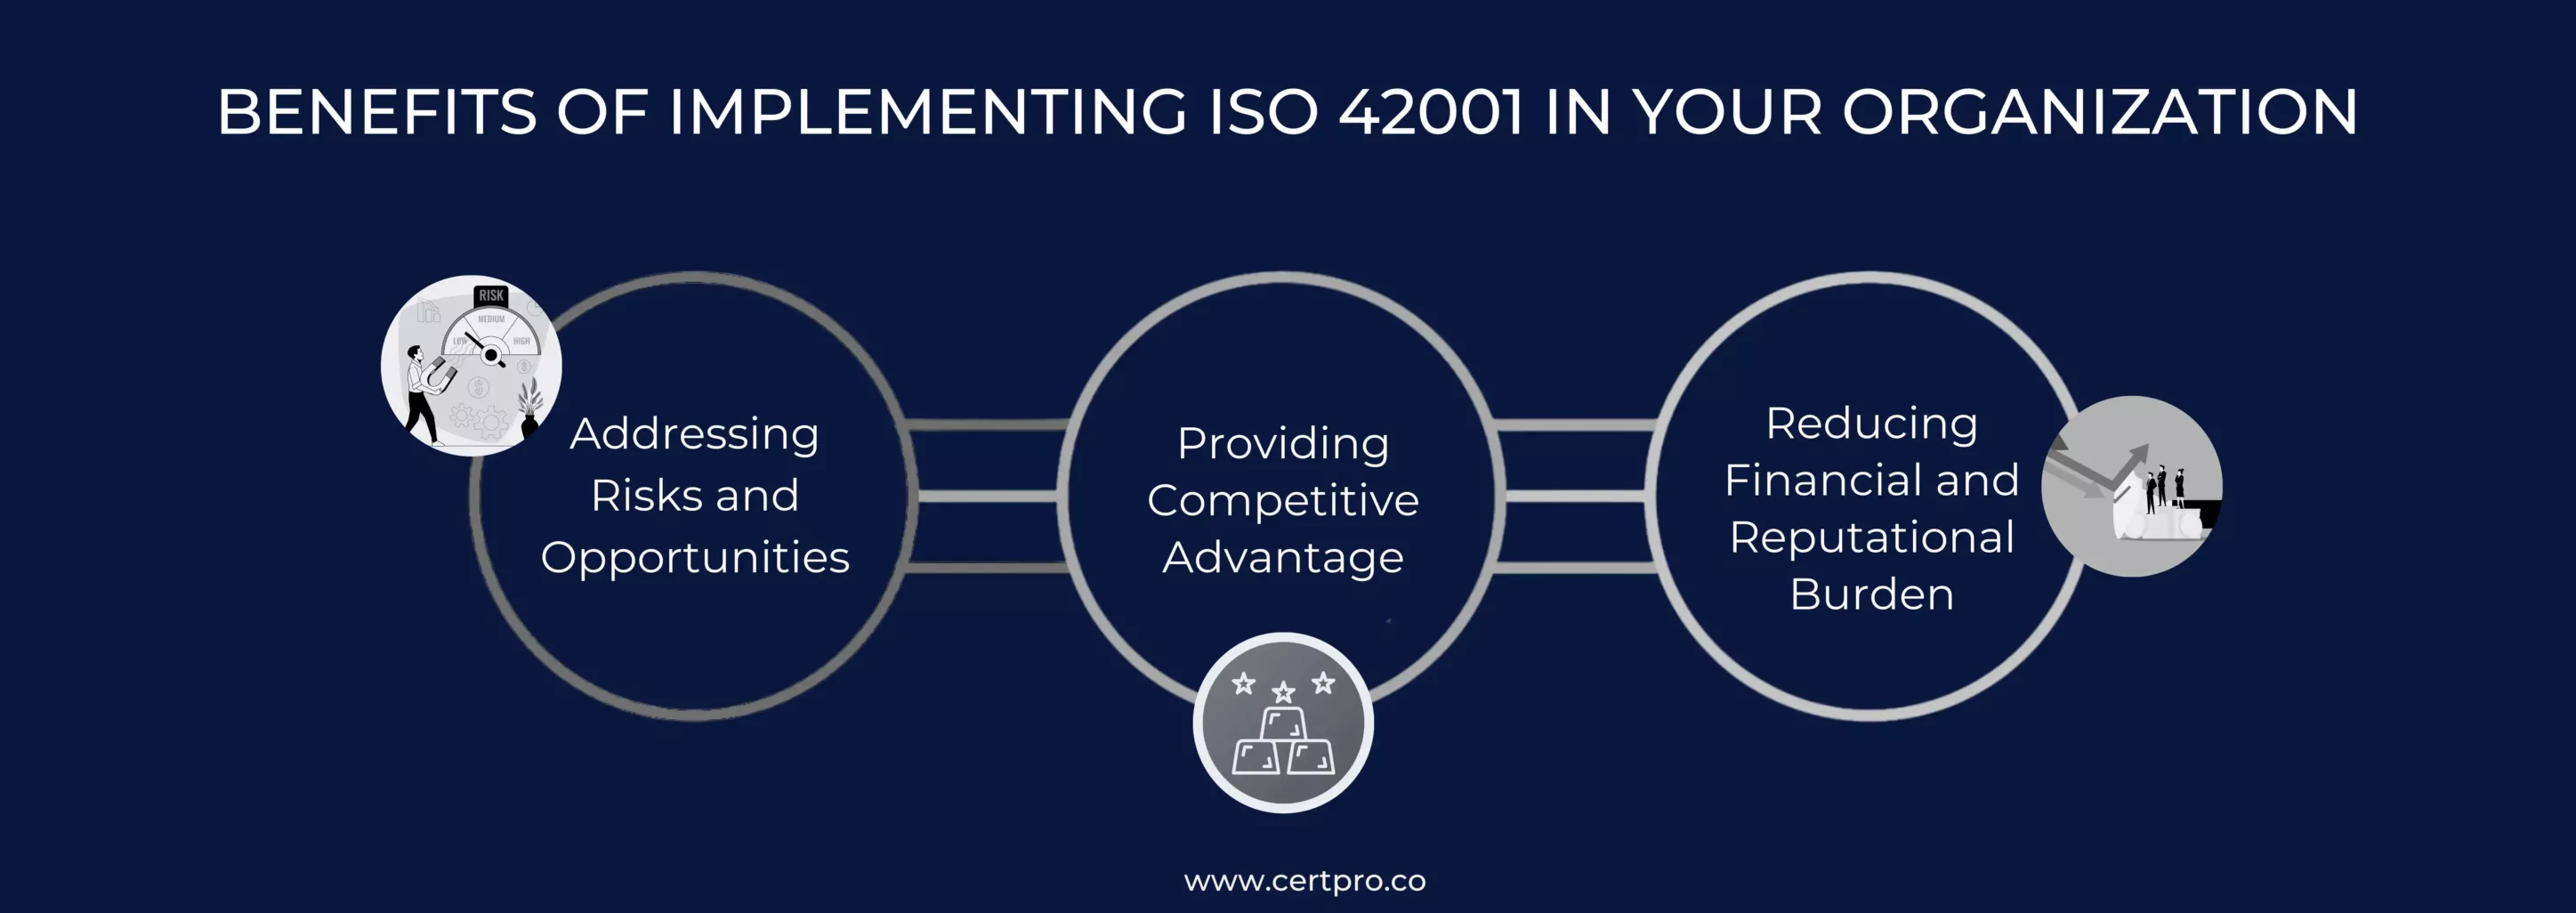 BENEFITS OF IMPLEMENTING ISO 42001 IN YOUR ORGANIZATION